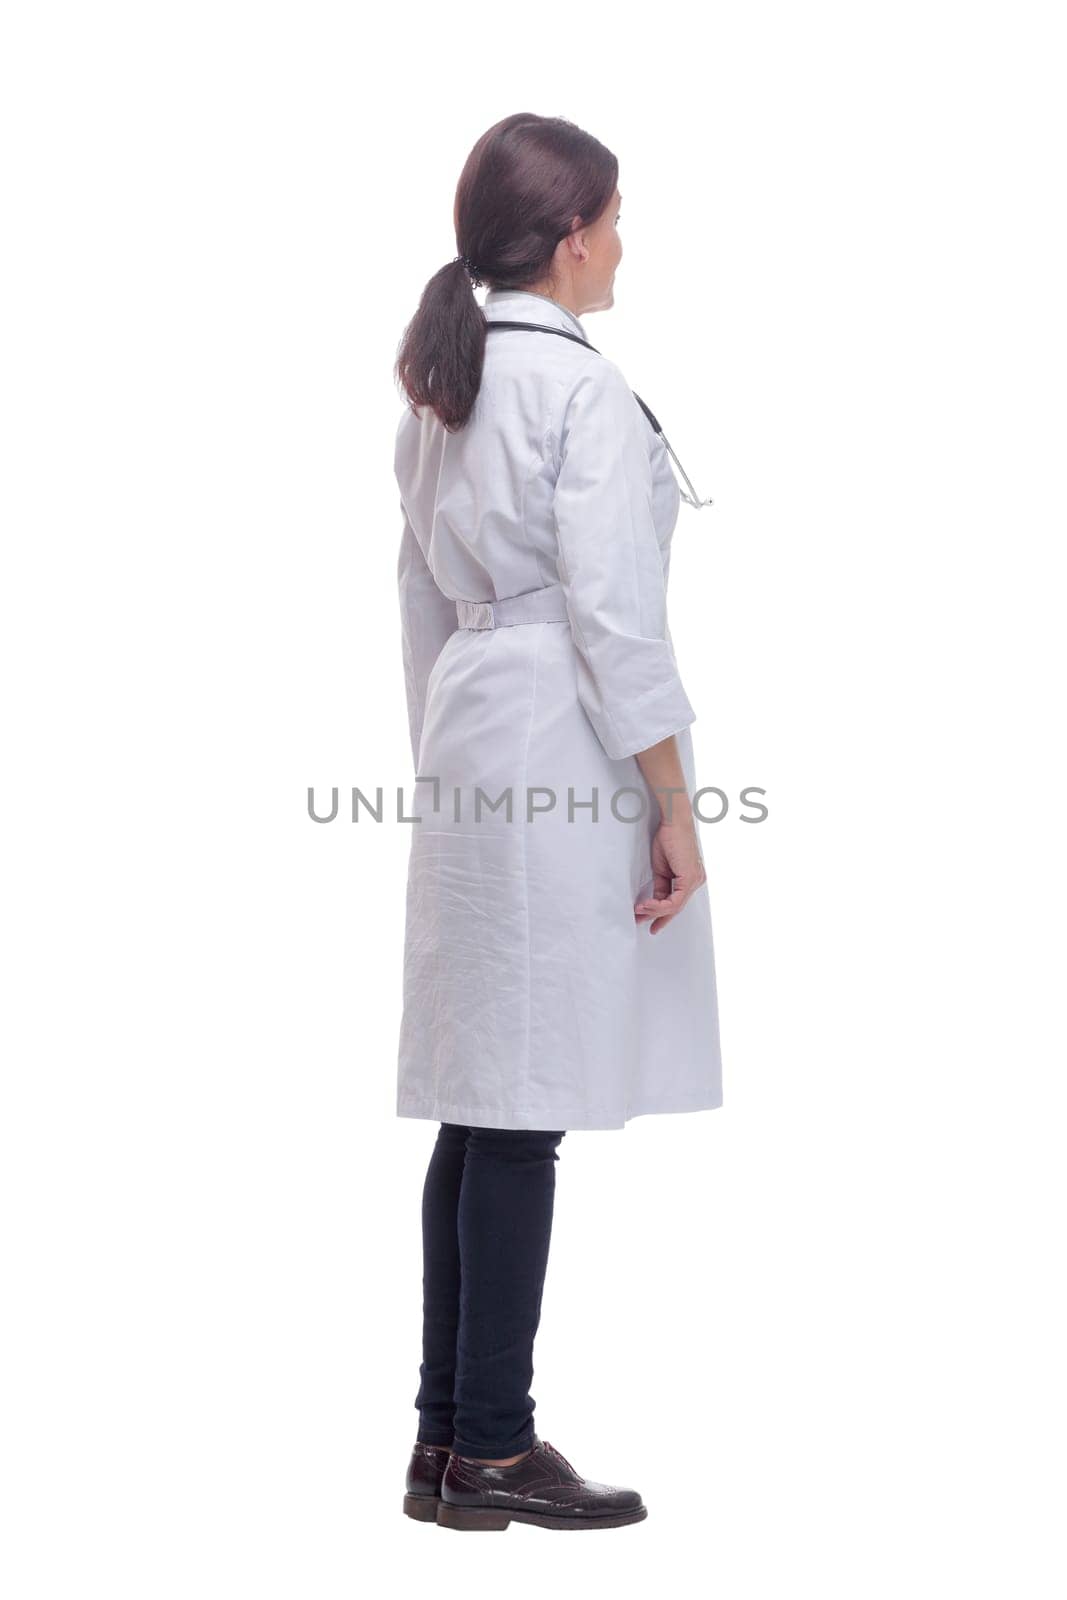 Female health care worker from the back - looking at something over a white background